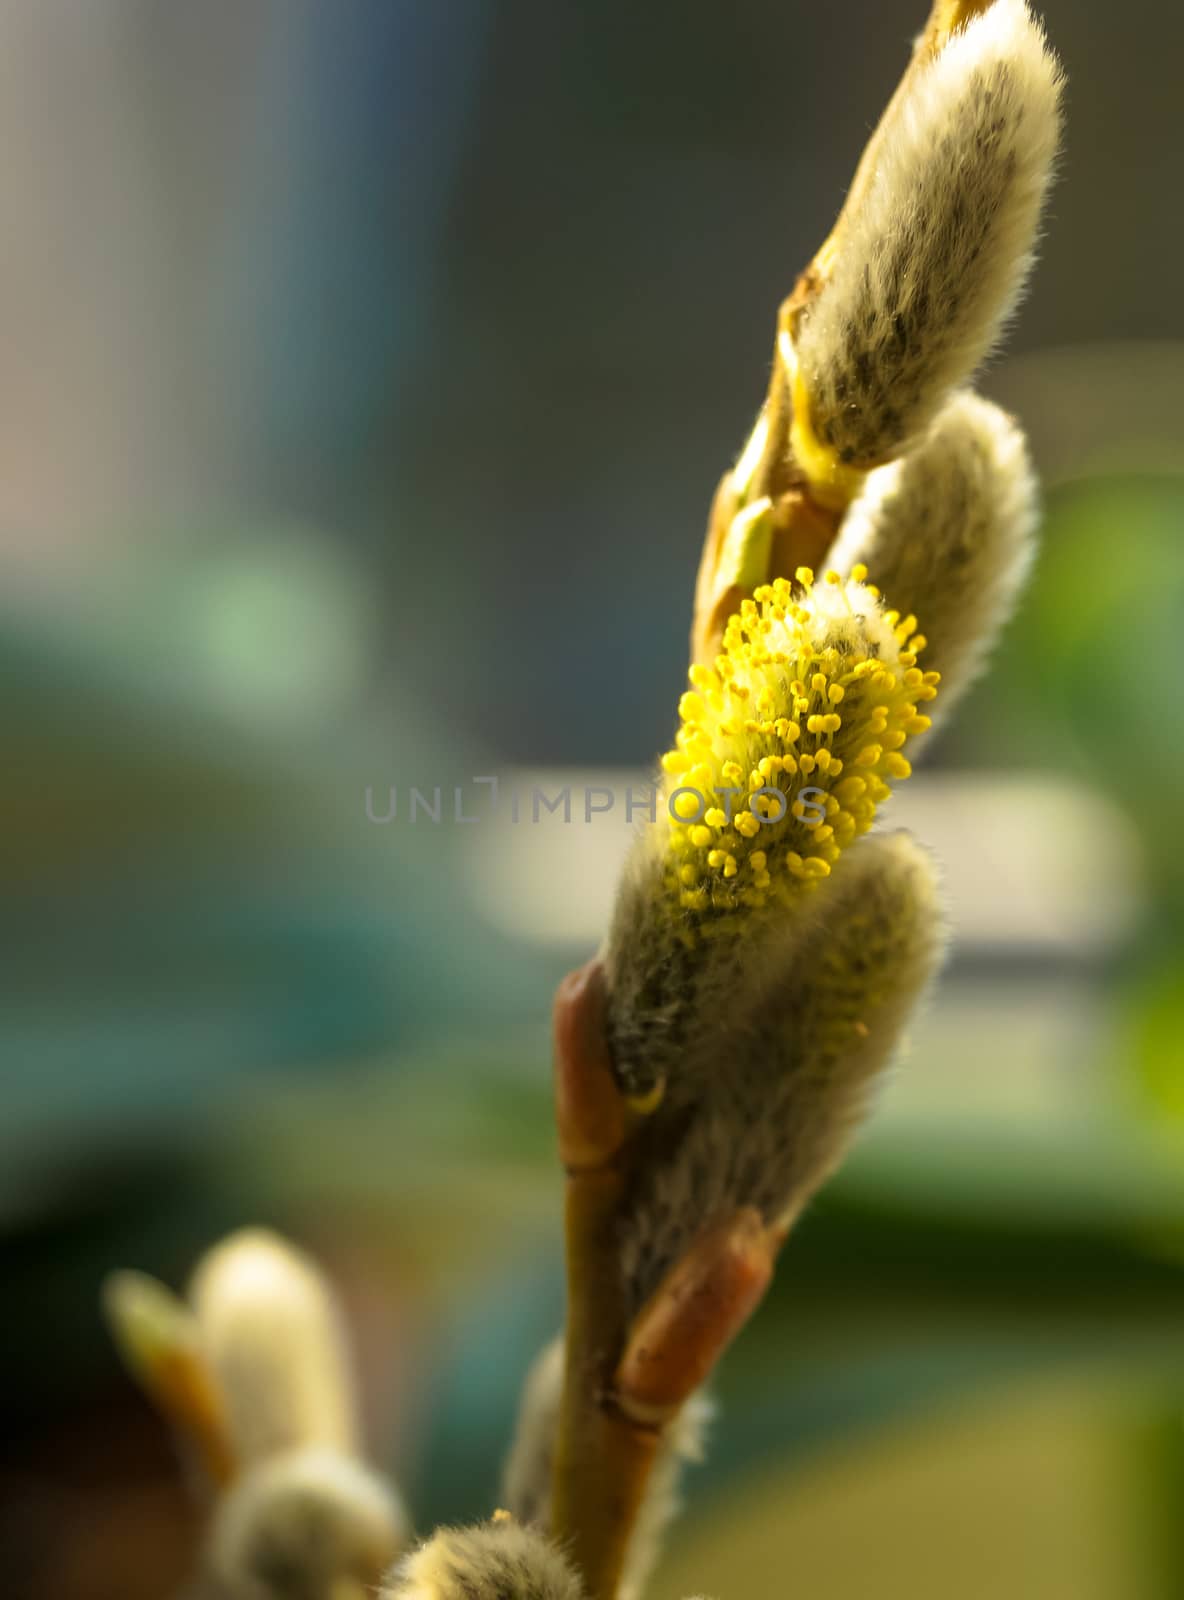 willow twig in bloom